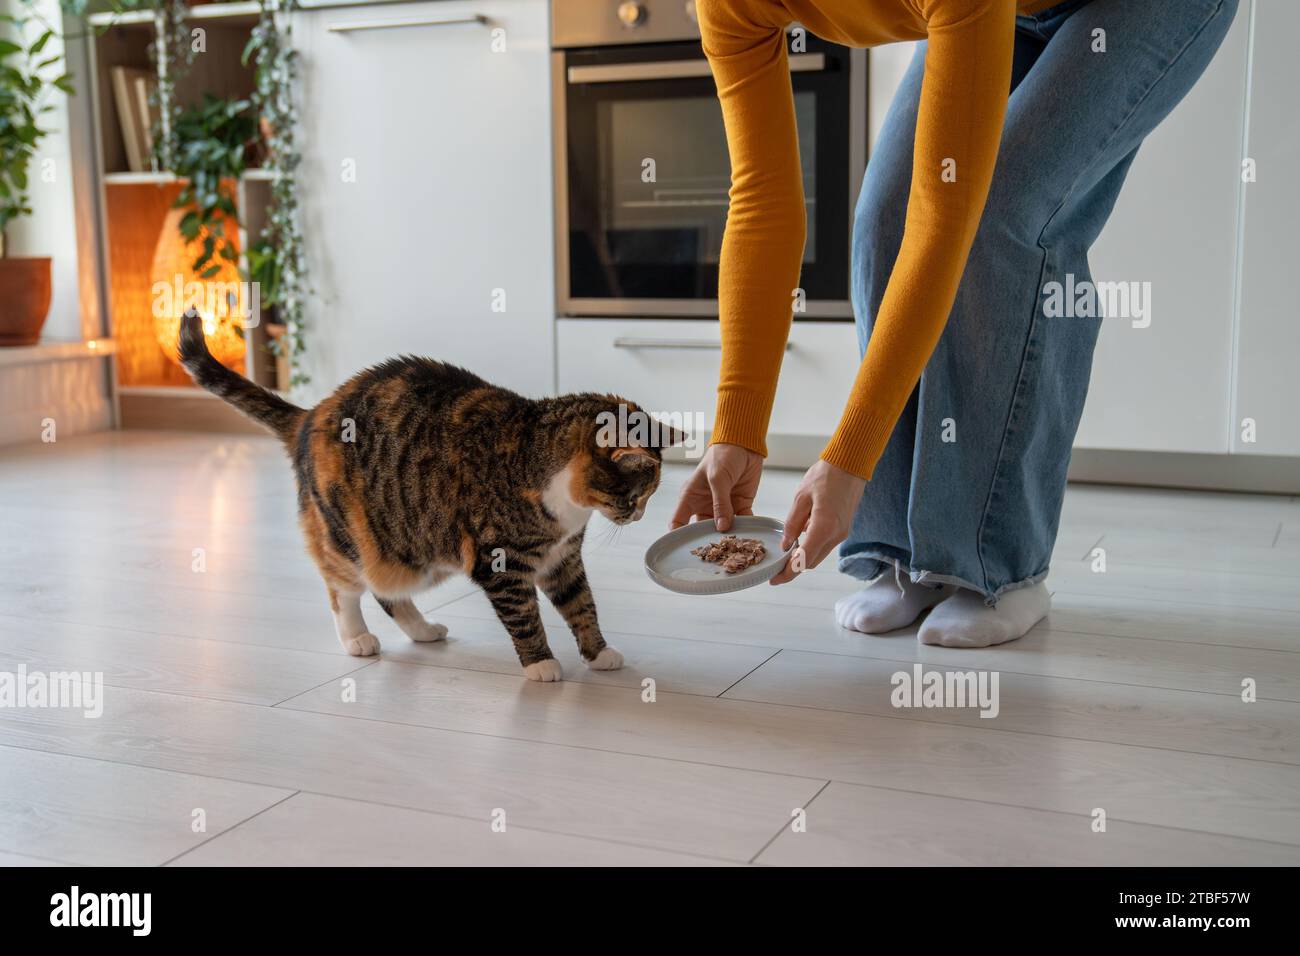 Obese cat sniffing new meal proposed by pet owner. Selective eating, domestic pet overweight problem Stock Photo